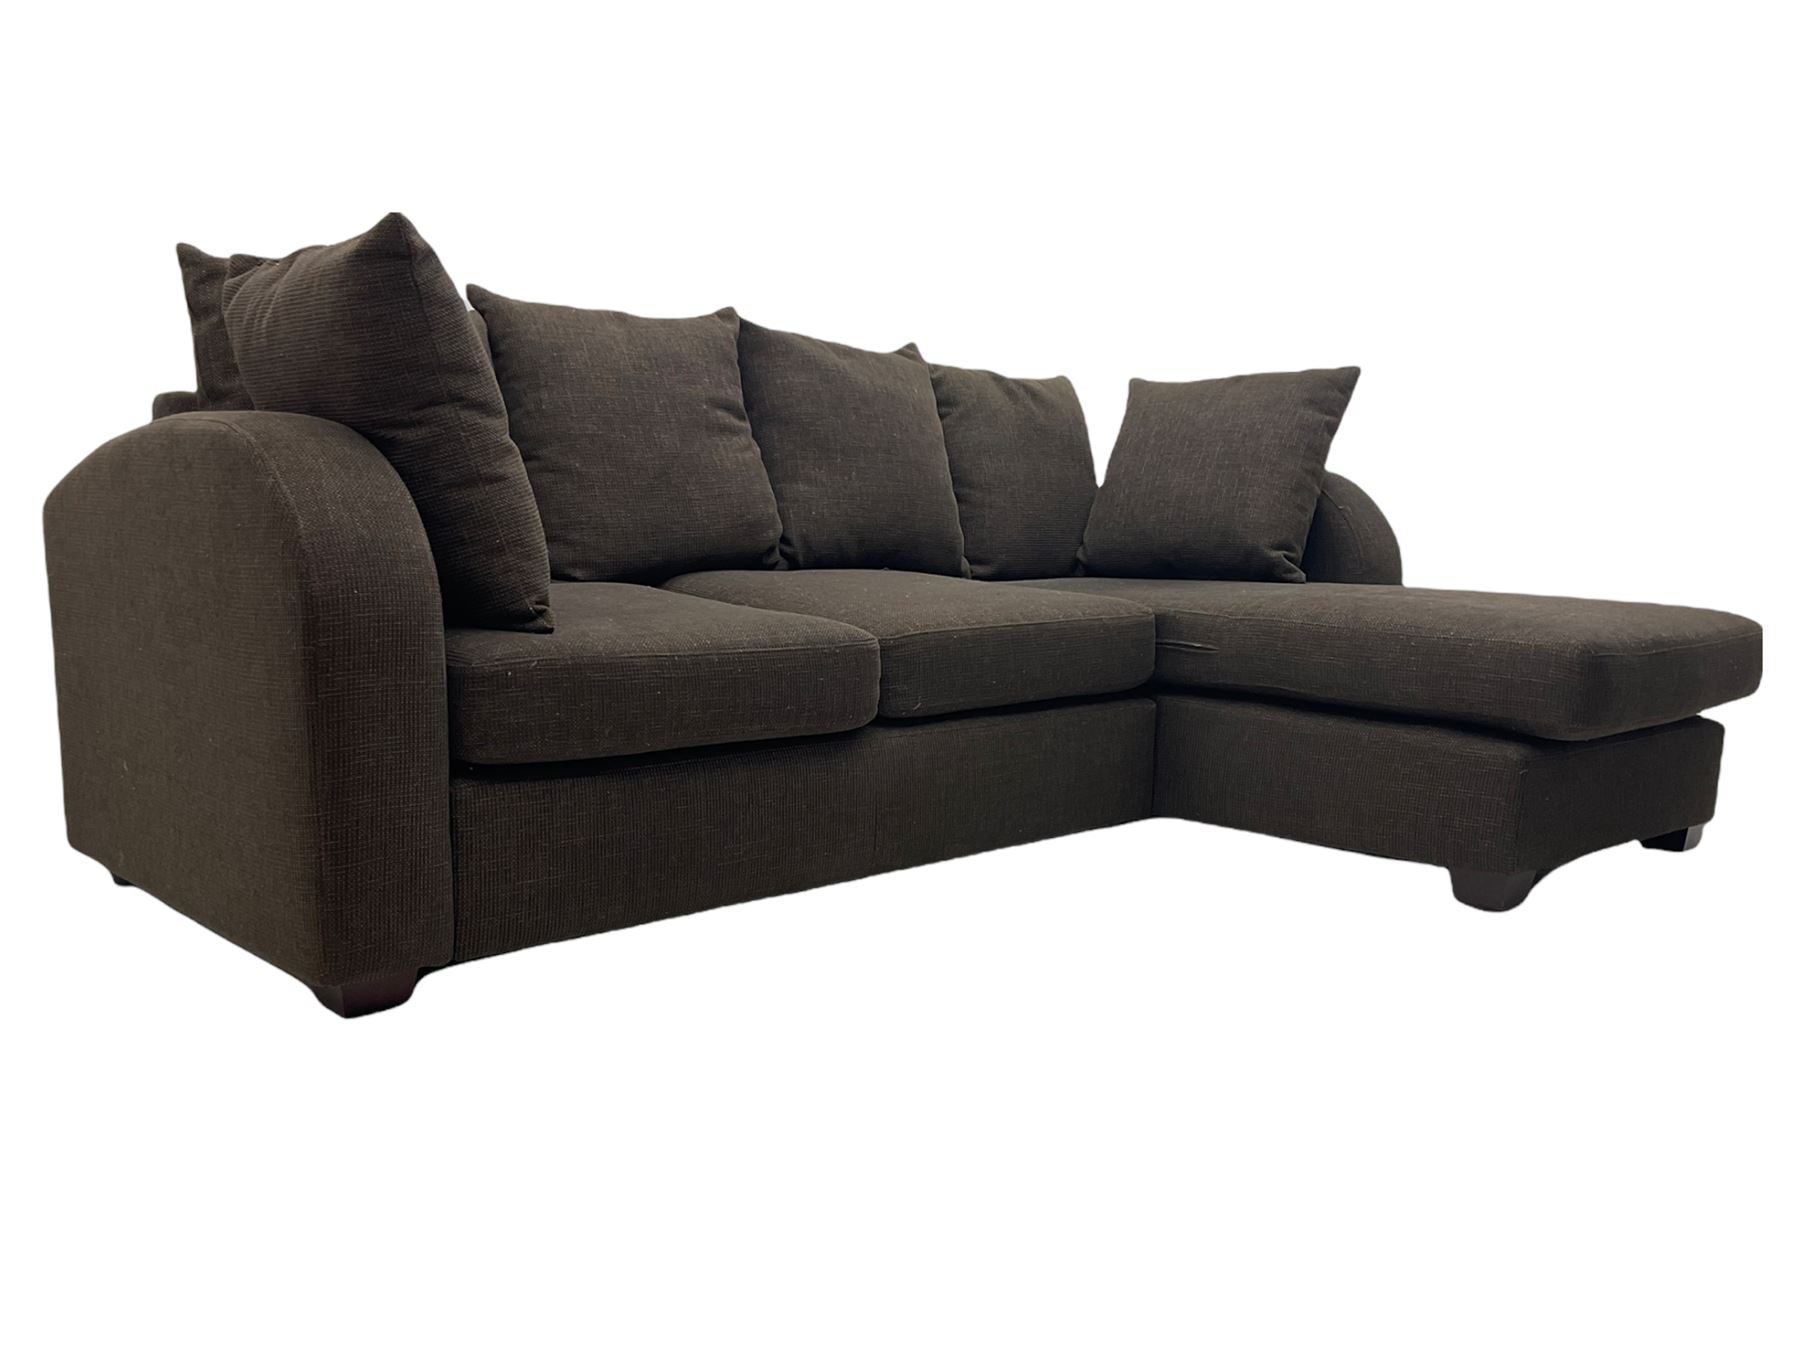 Corner sofa with right hand chaise - Image 2 of 8